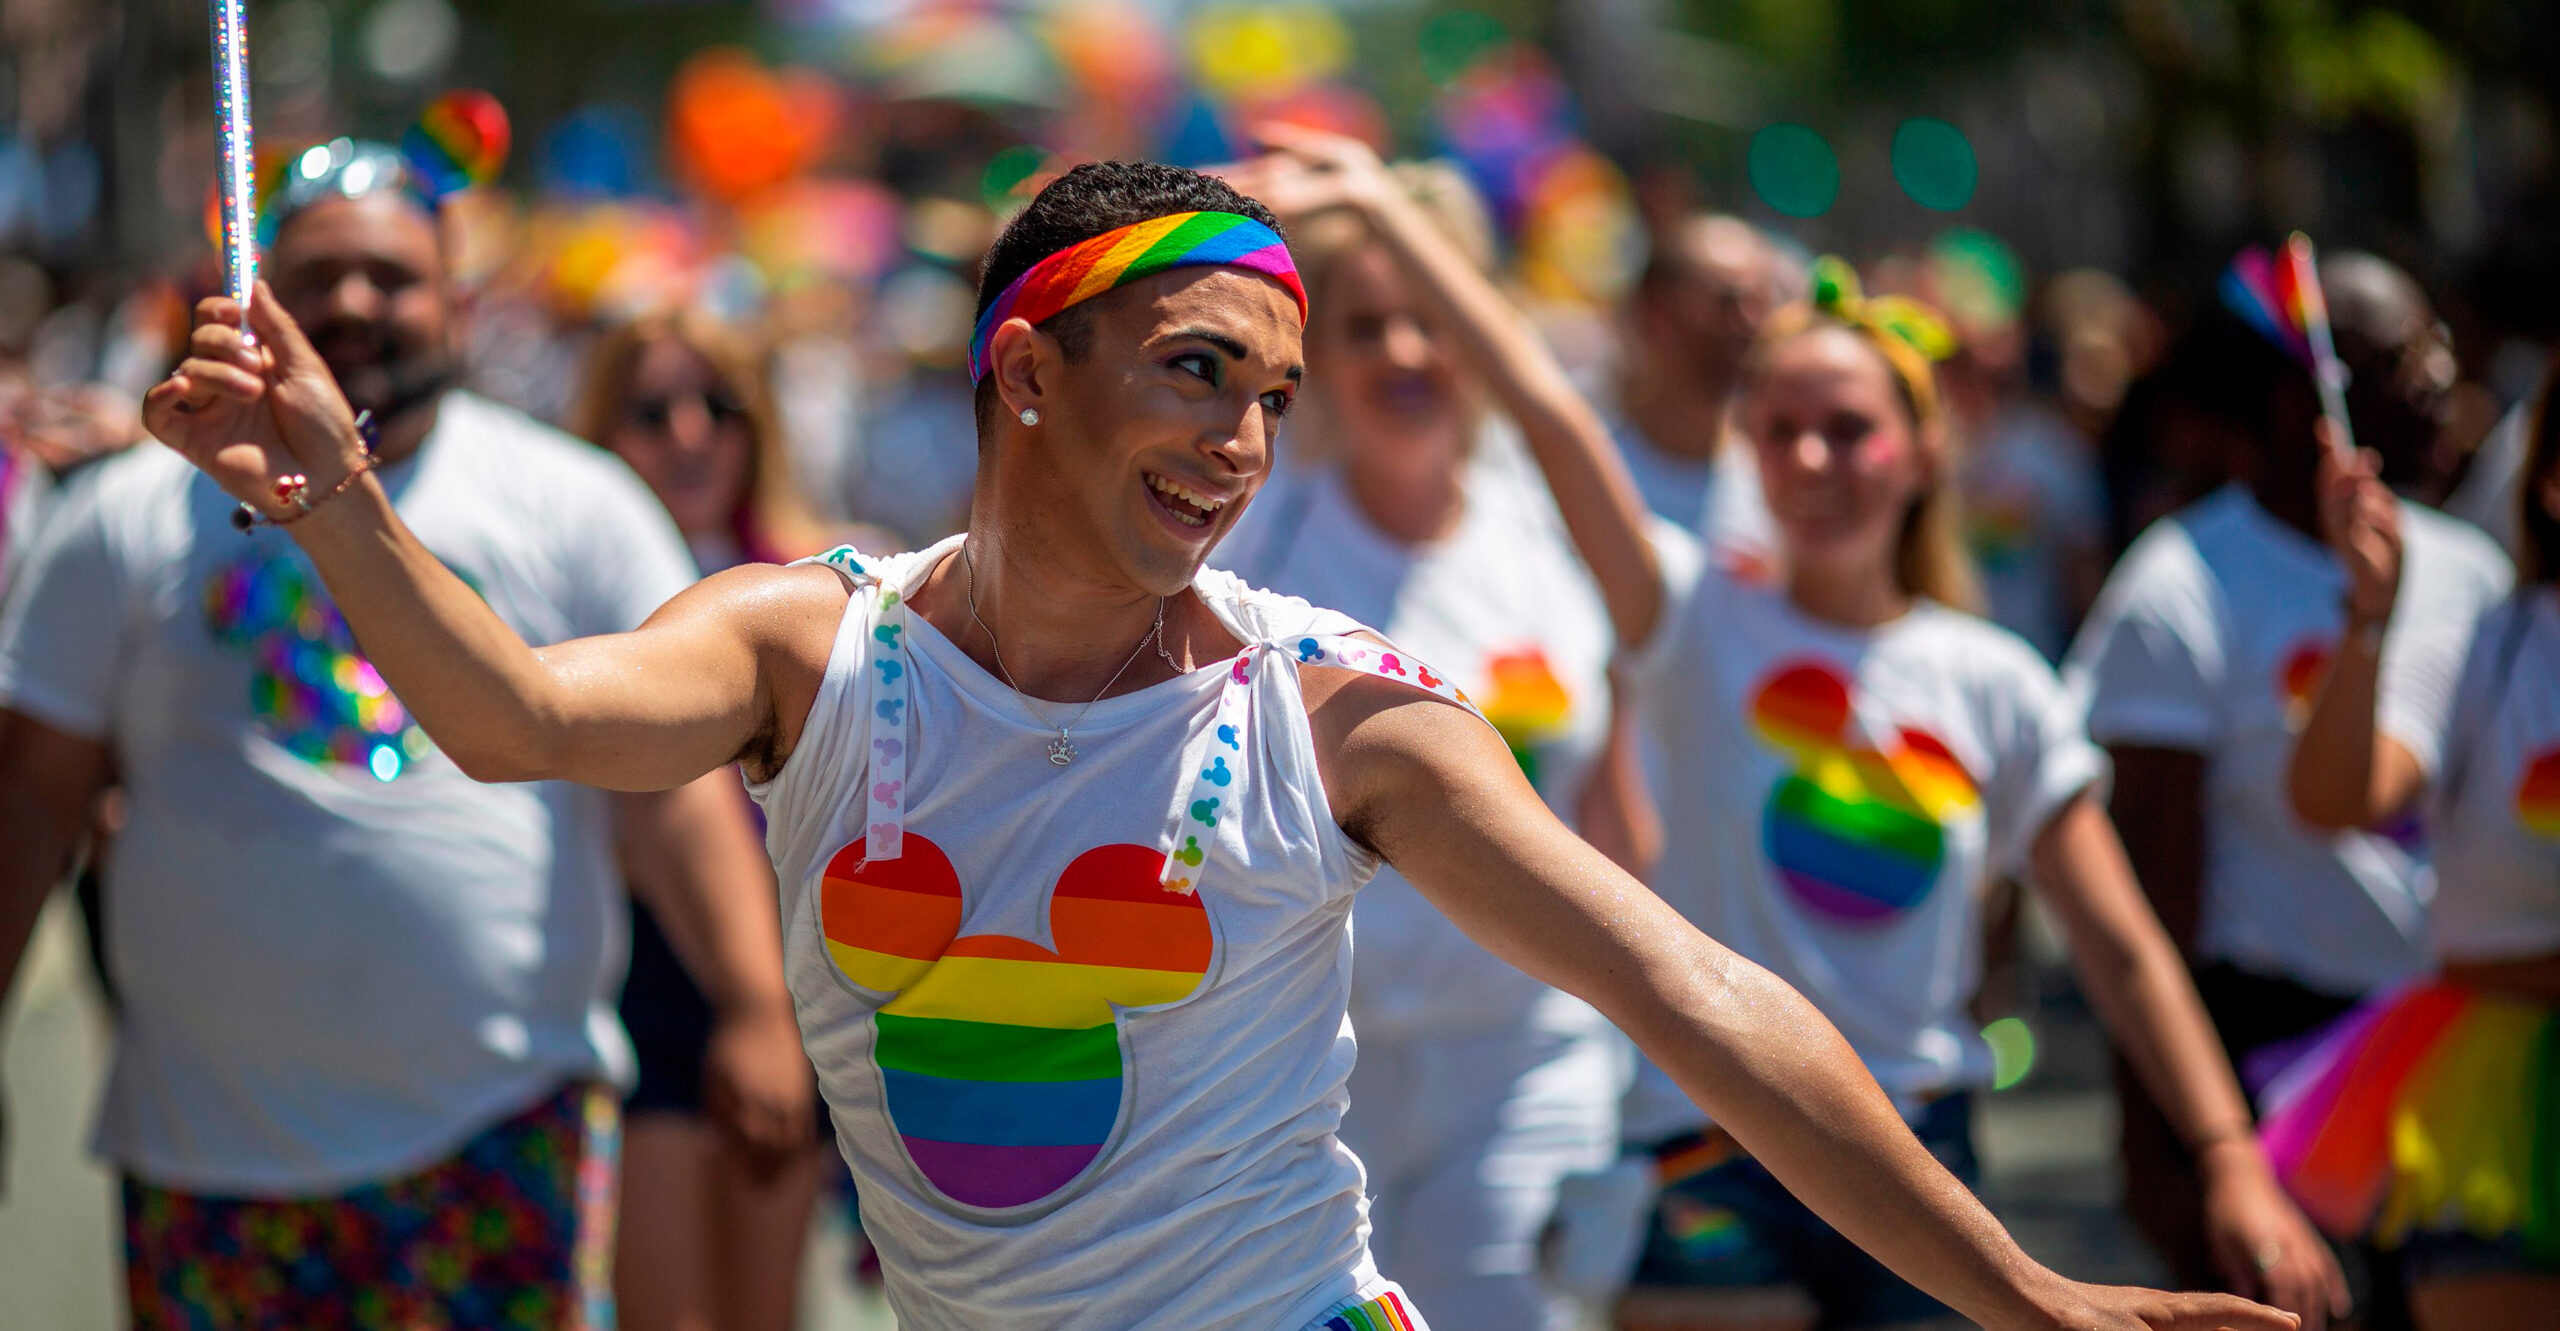 From Mickey Mouse to Tony the Tiger, Brands Improperly Target Kids for Pride Month